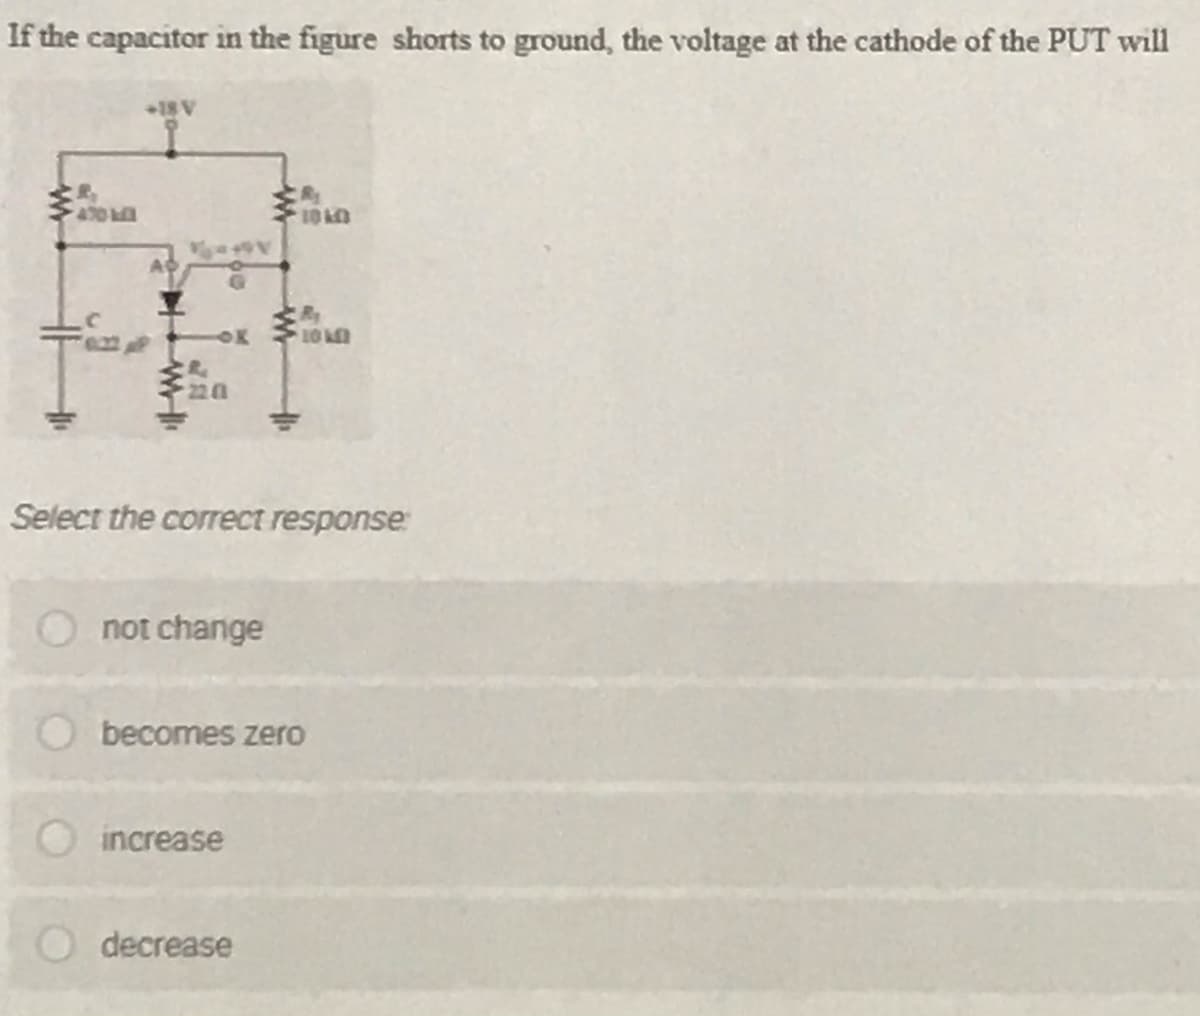 If the capacitor in the figure shorts to ground, the voltage at the cathode of the PUT will
+18 V
470
AC
OK 10
220
Select the correct response:
not change
becomes zero
increase
decrease
